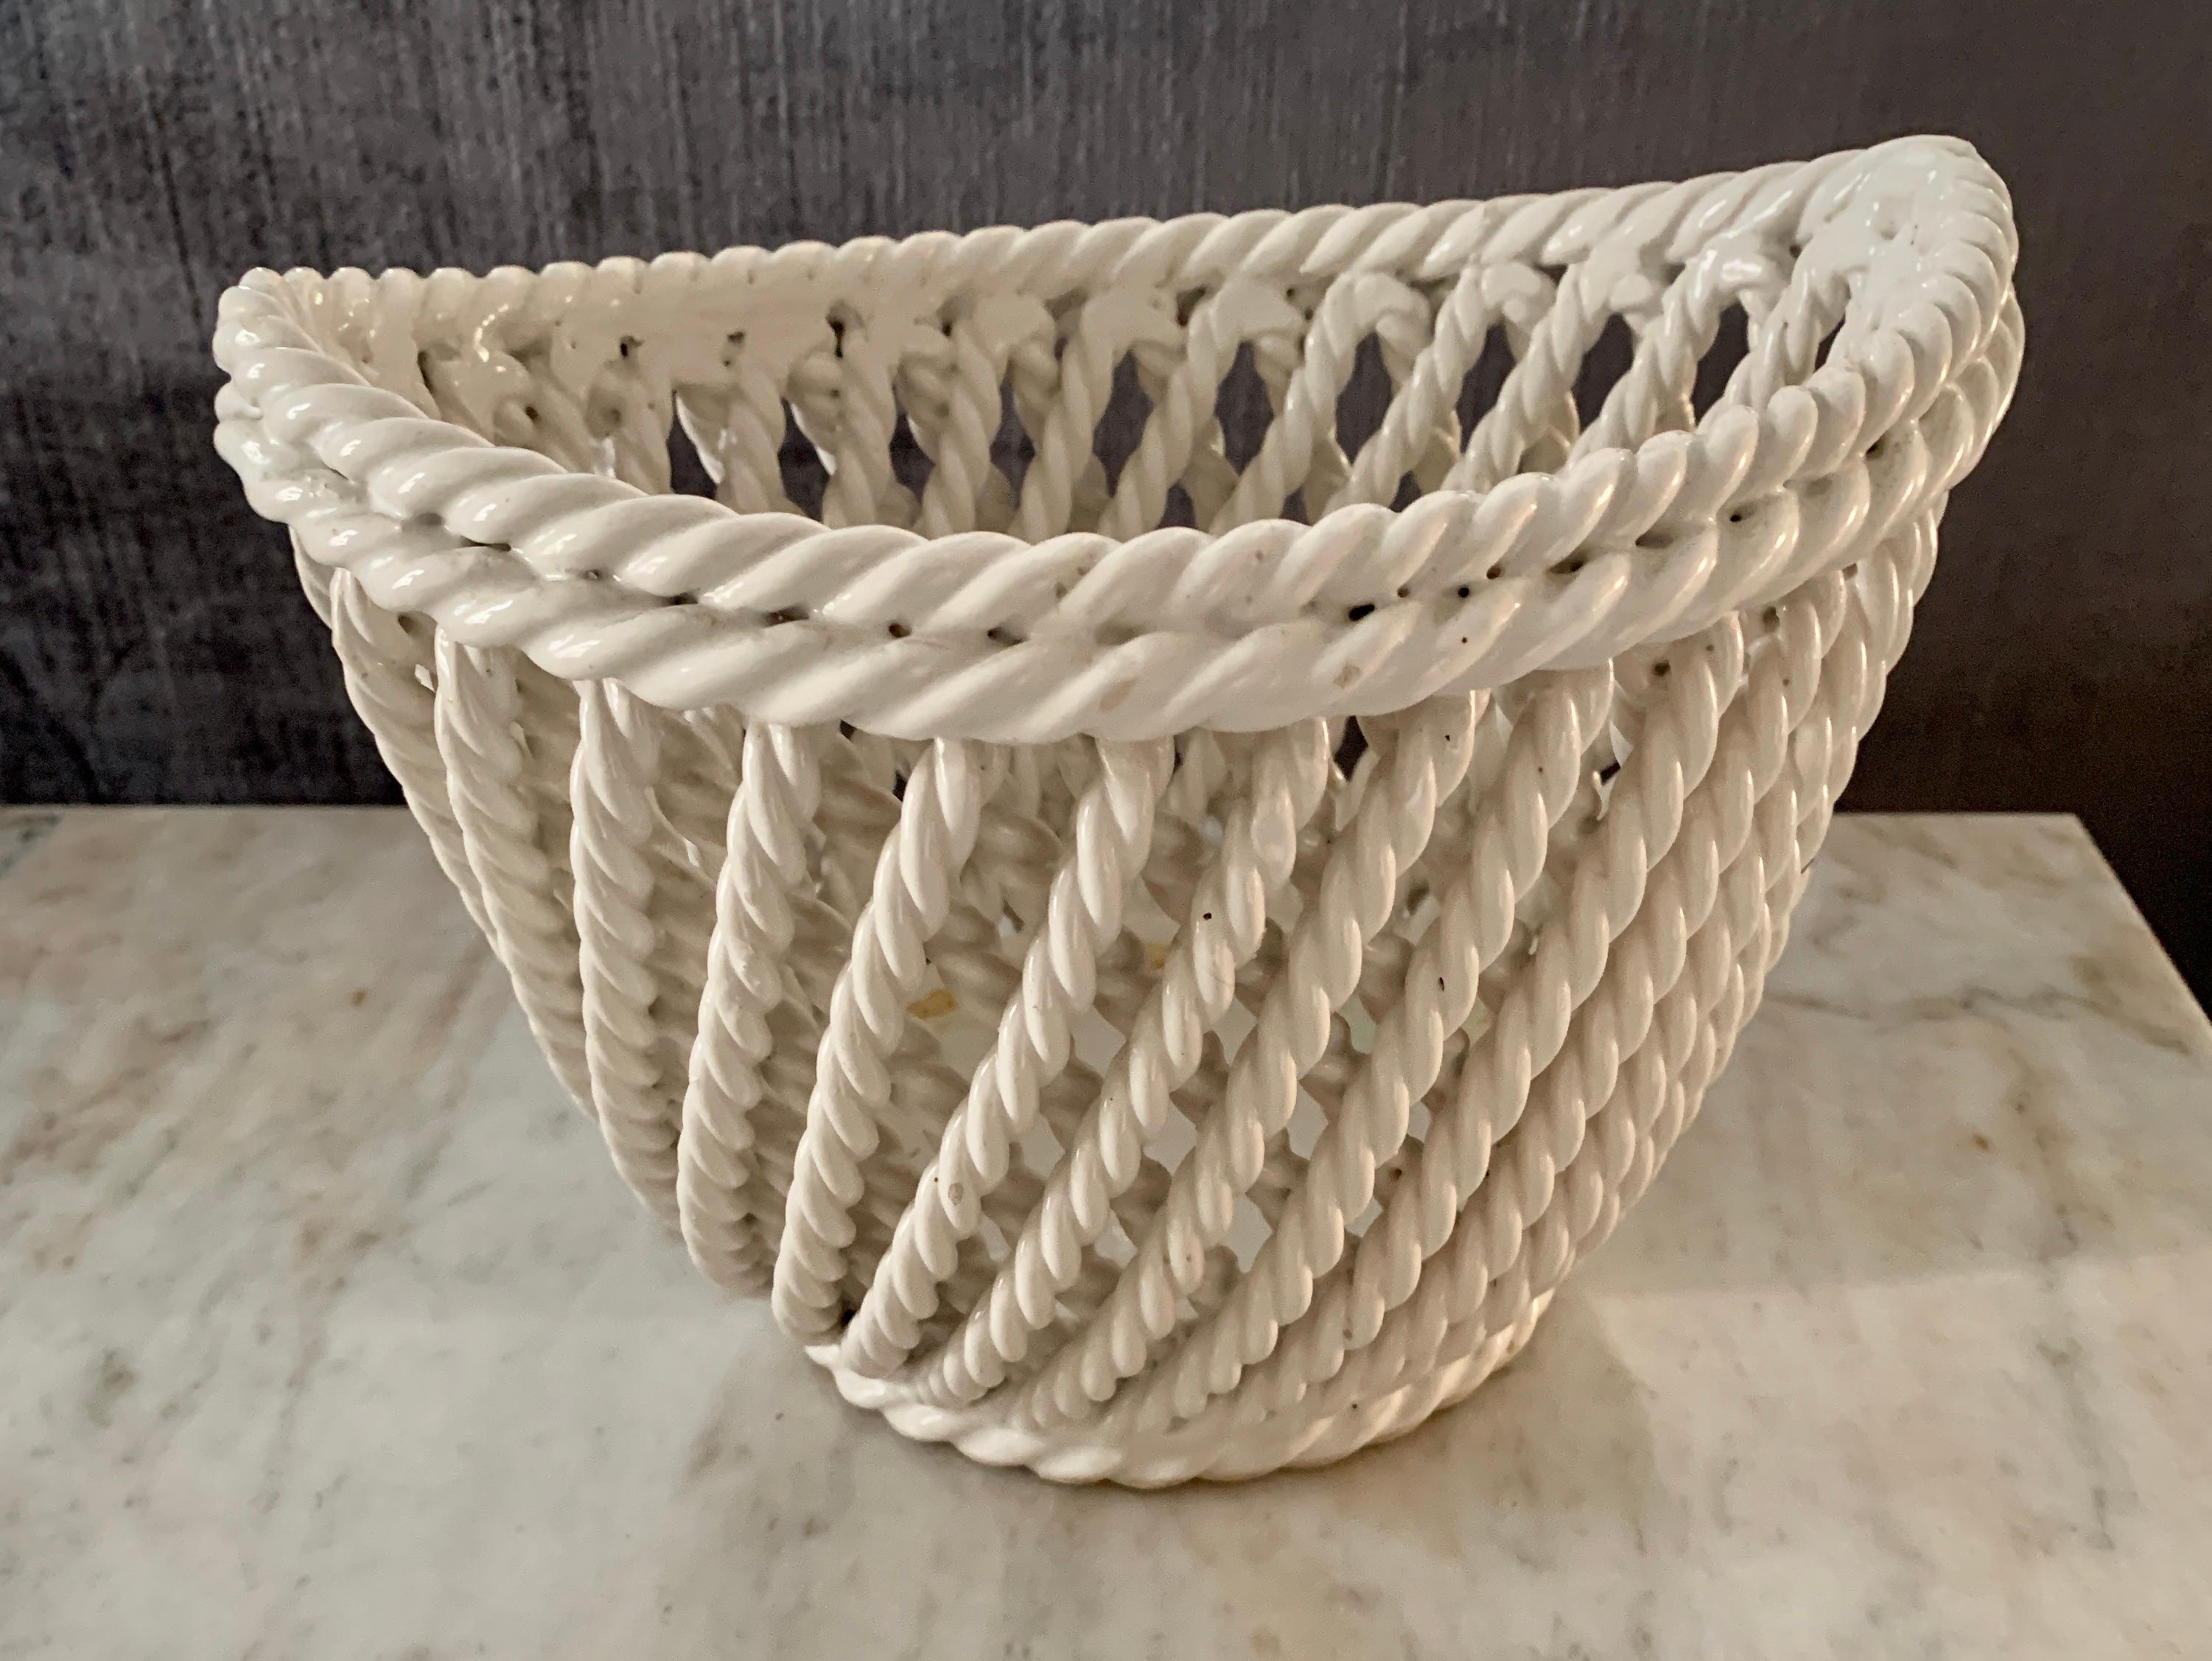 Elliptical braided lattice ceramic Italian bowl, perfectly suited to Stand alone hold candy and nuts to a flower arrangement or the side table, marked Italy on the bottom, no chips or condition issues.